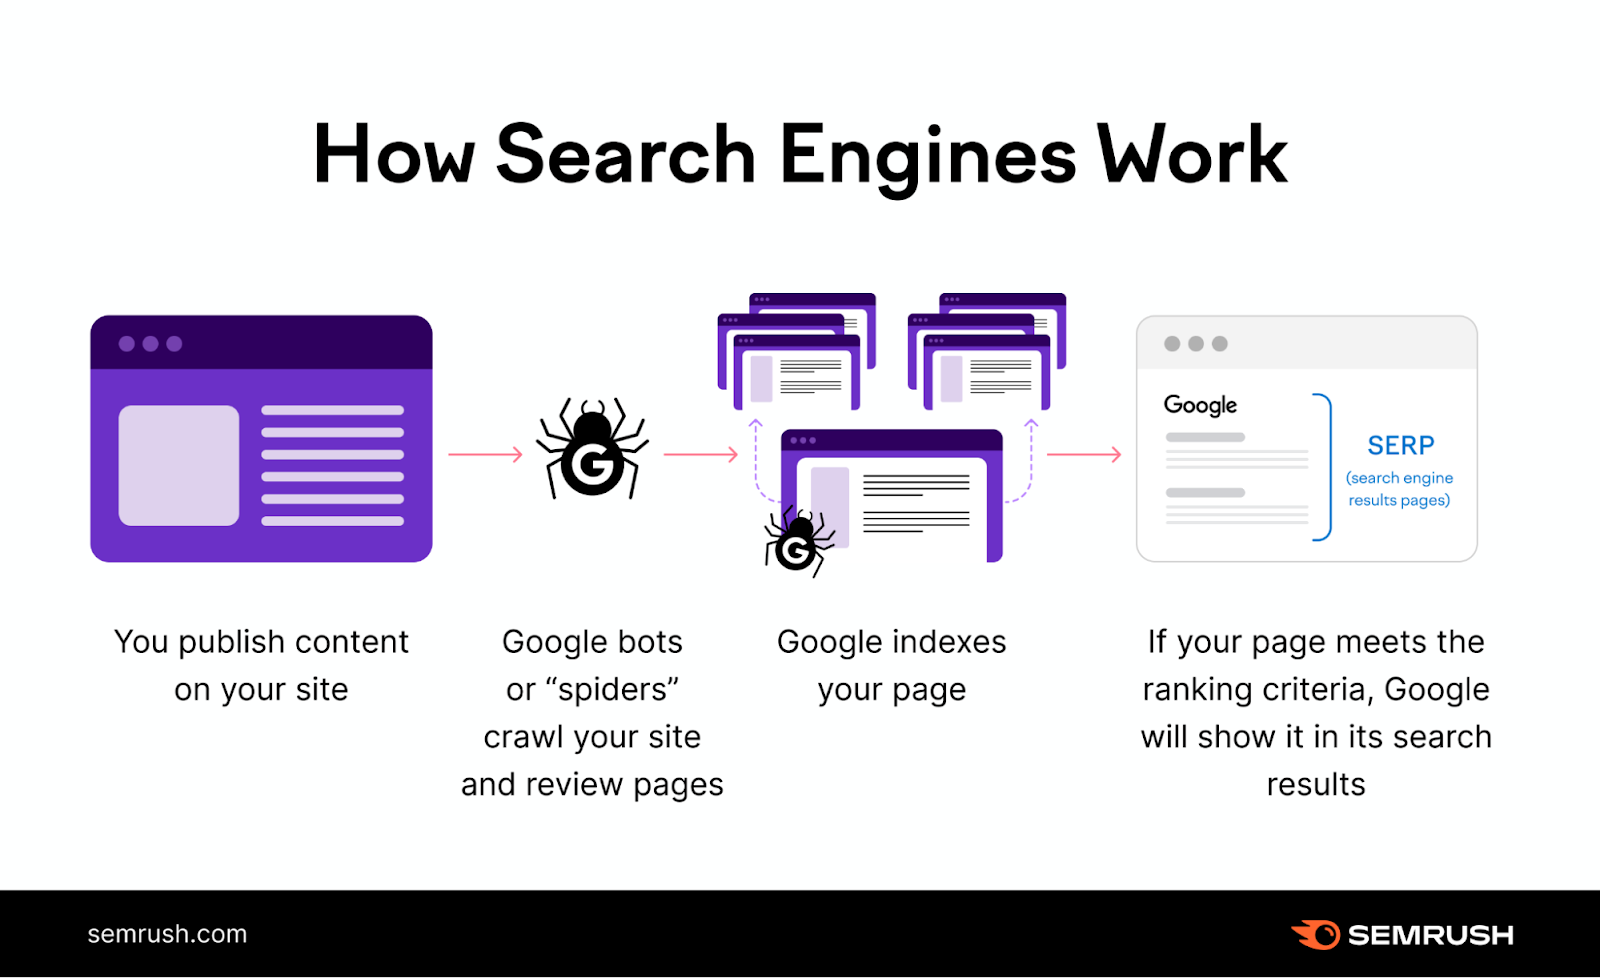 a simple illustration showing how search engines work